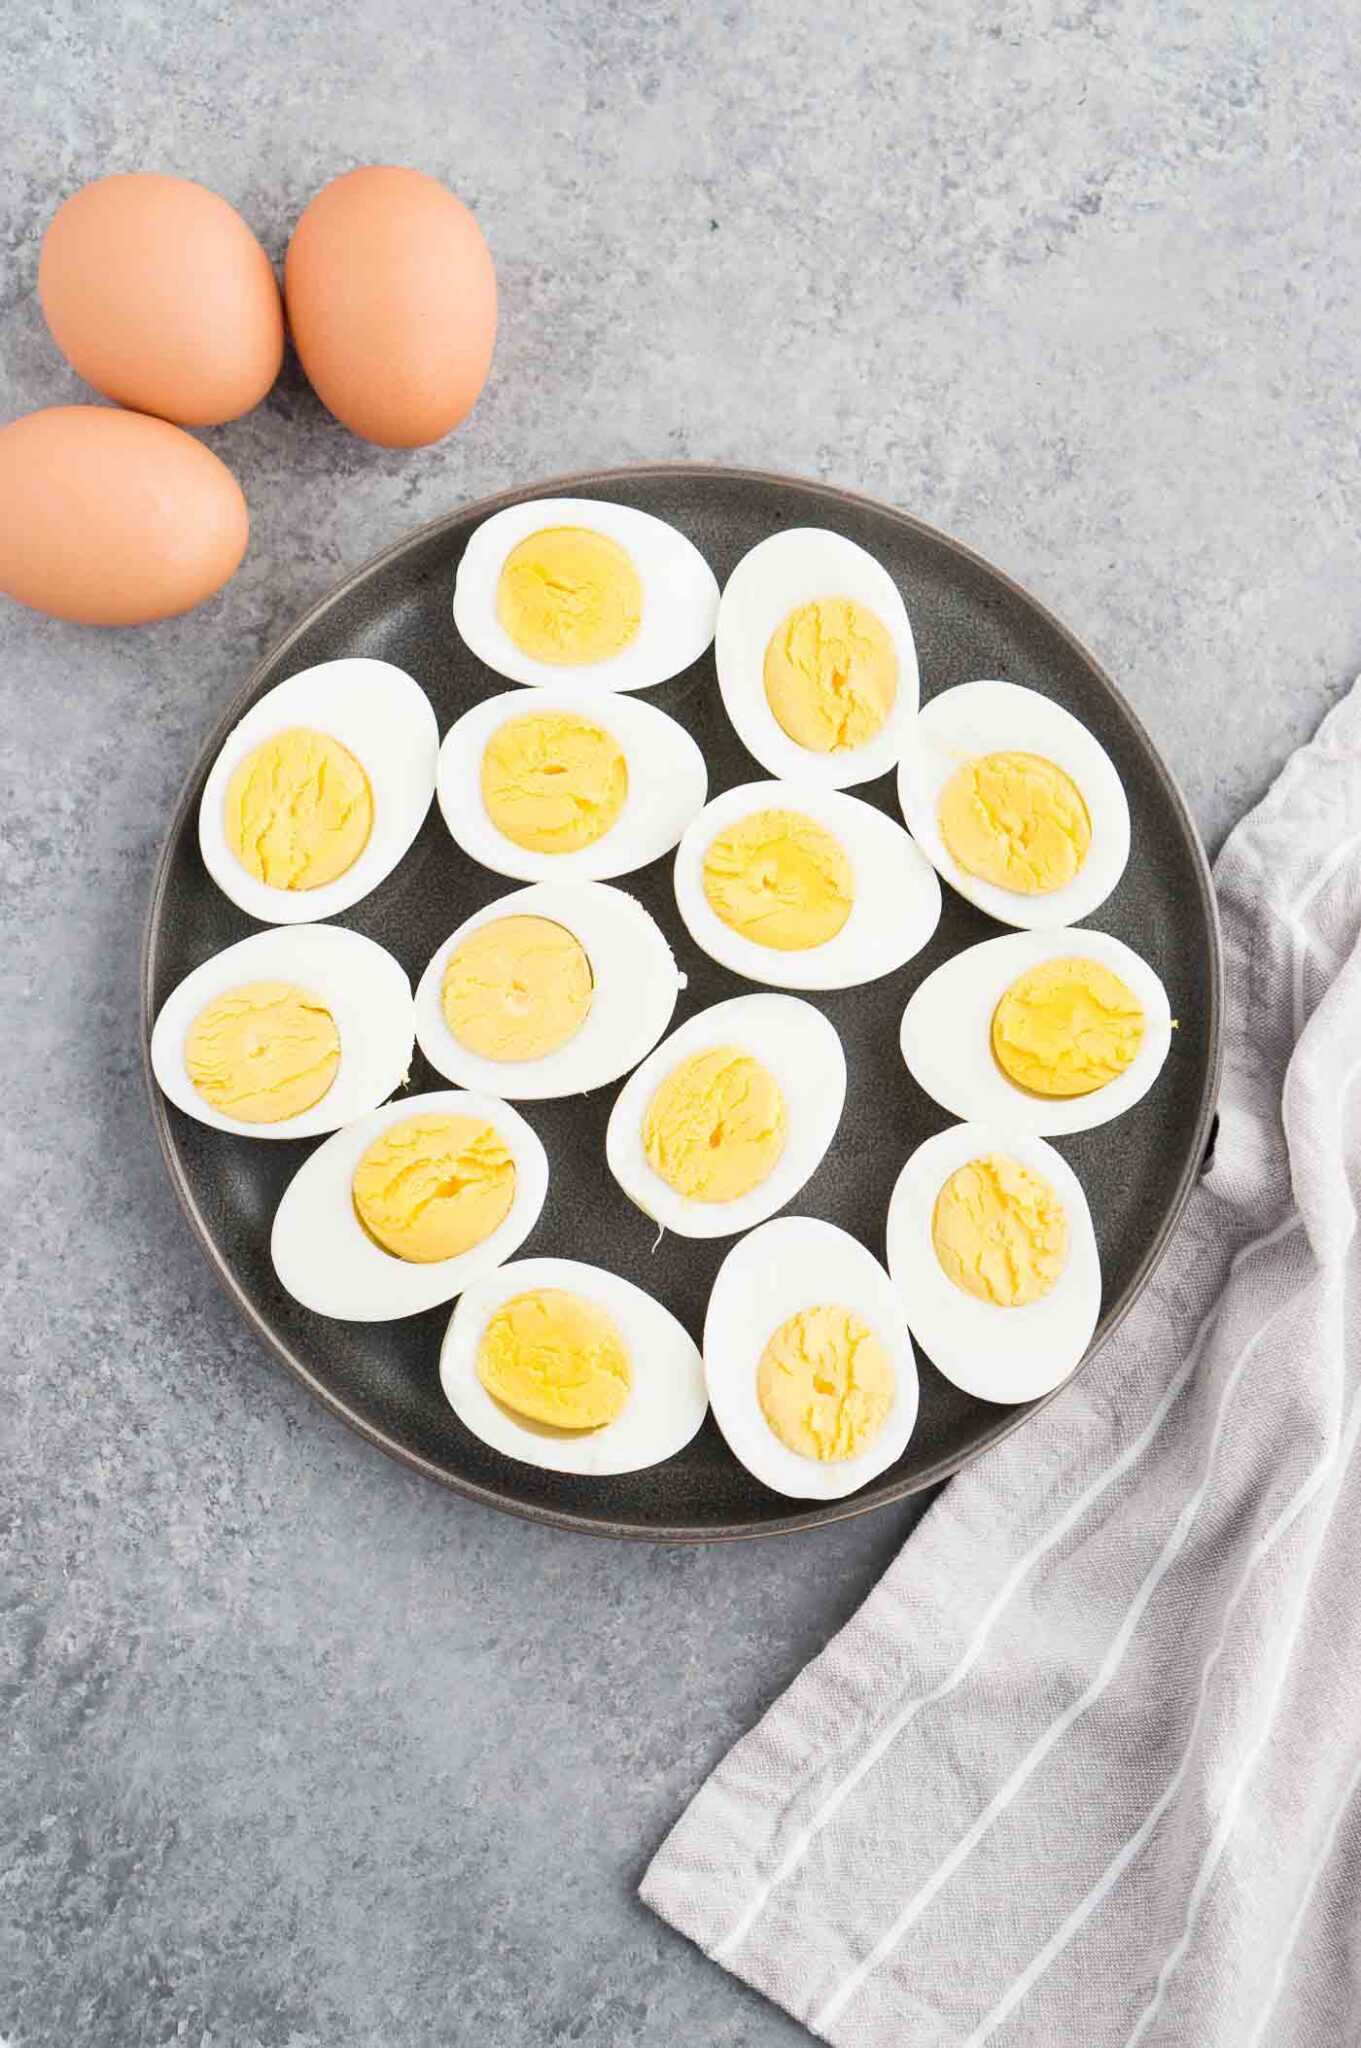 instant pot hard boiled eggs on a plate